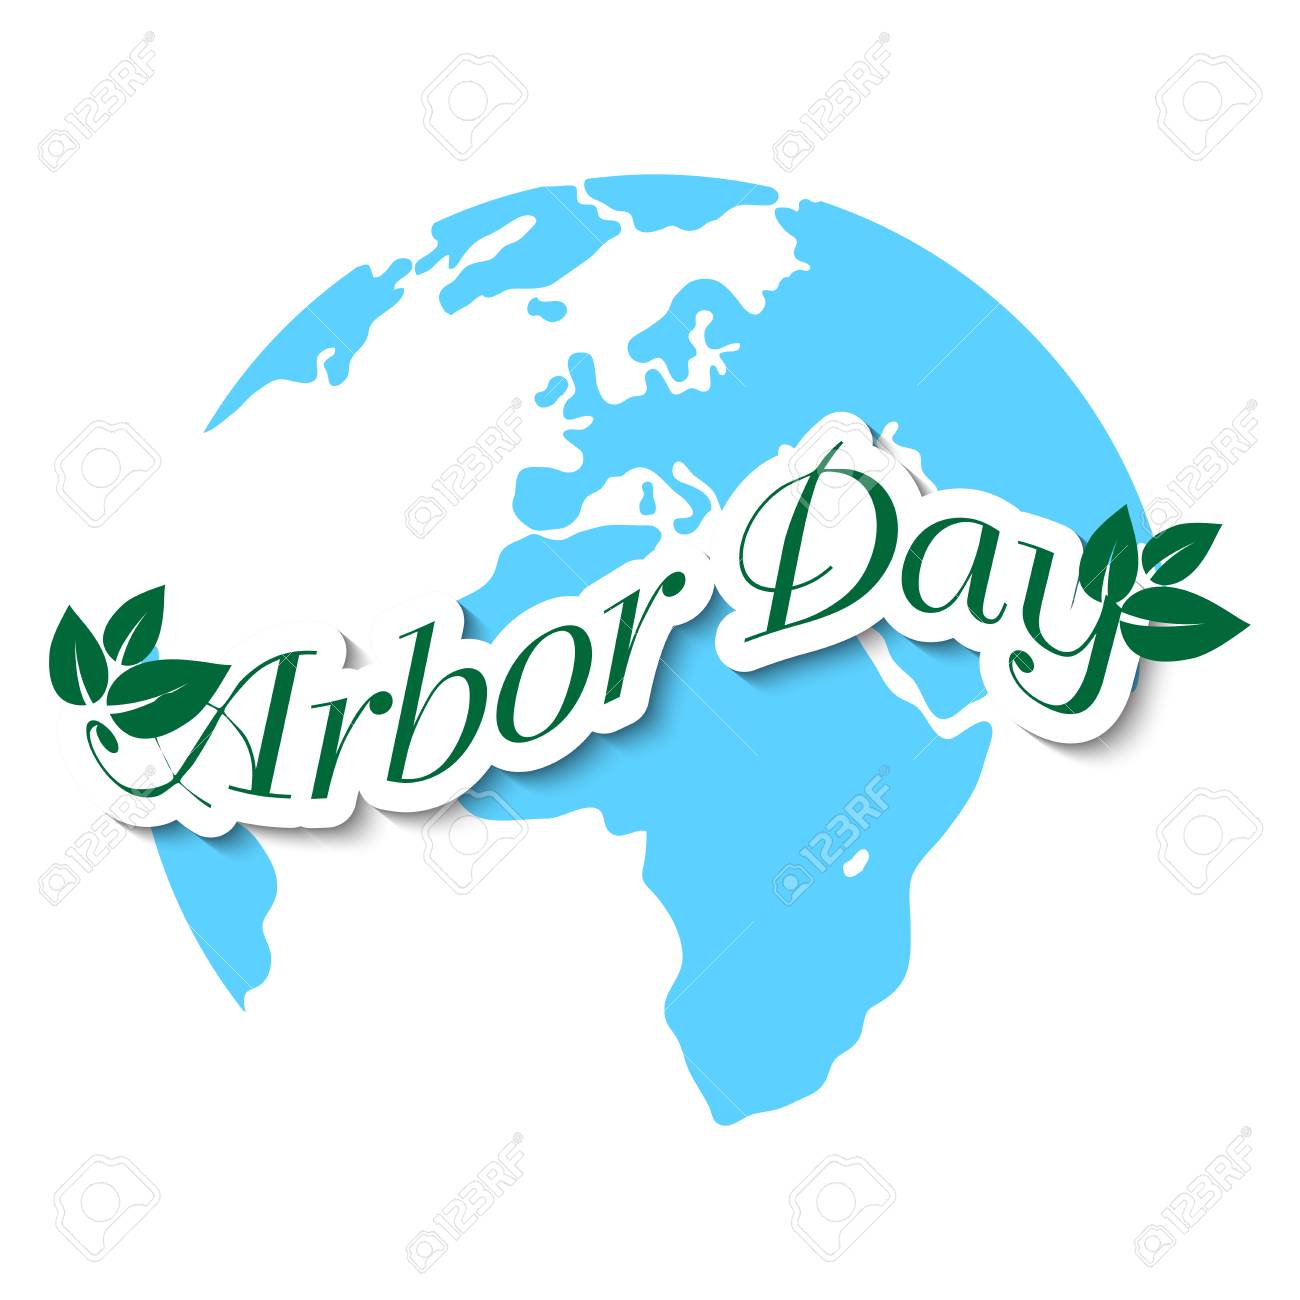 Arbor Day Banner Template With Leaves On World Background Vector